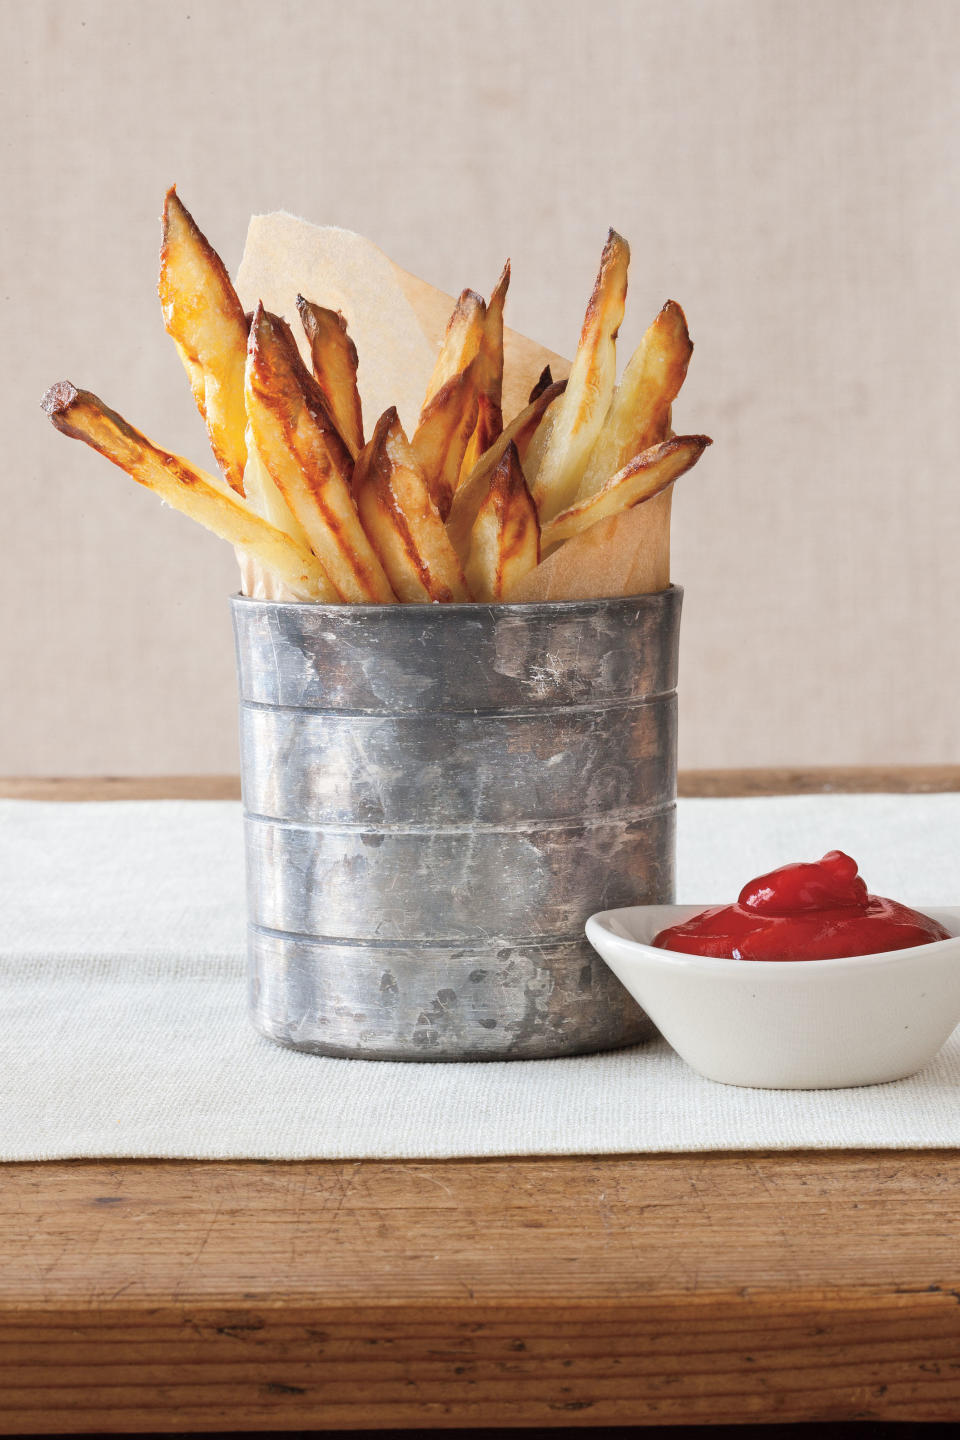 From-Scratch Oven Fries